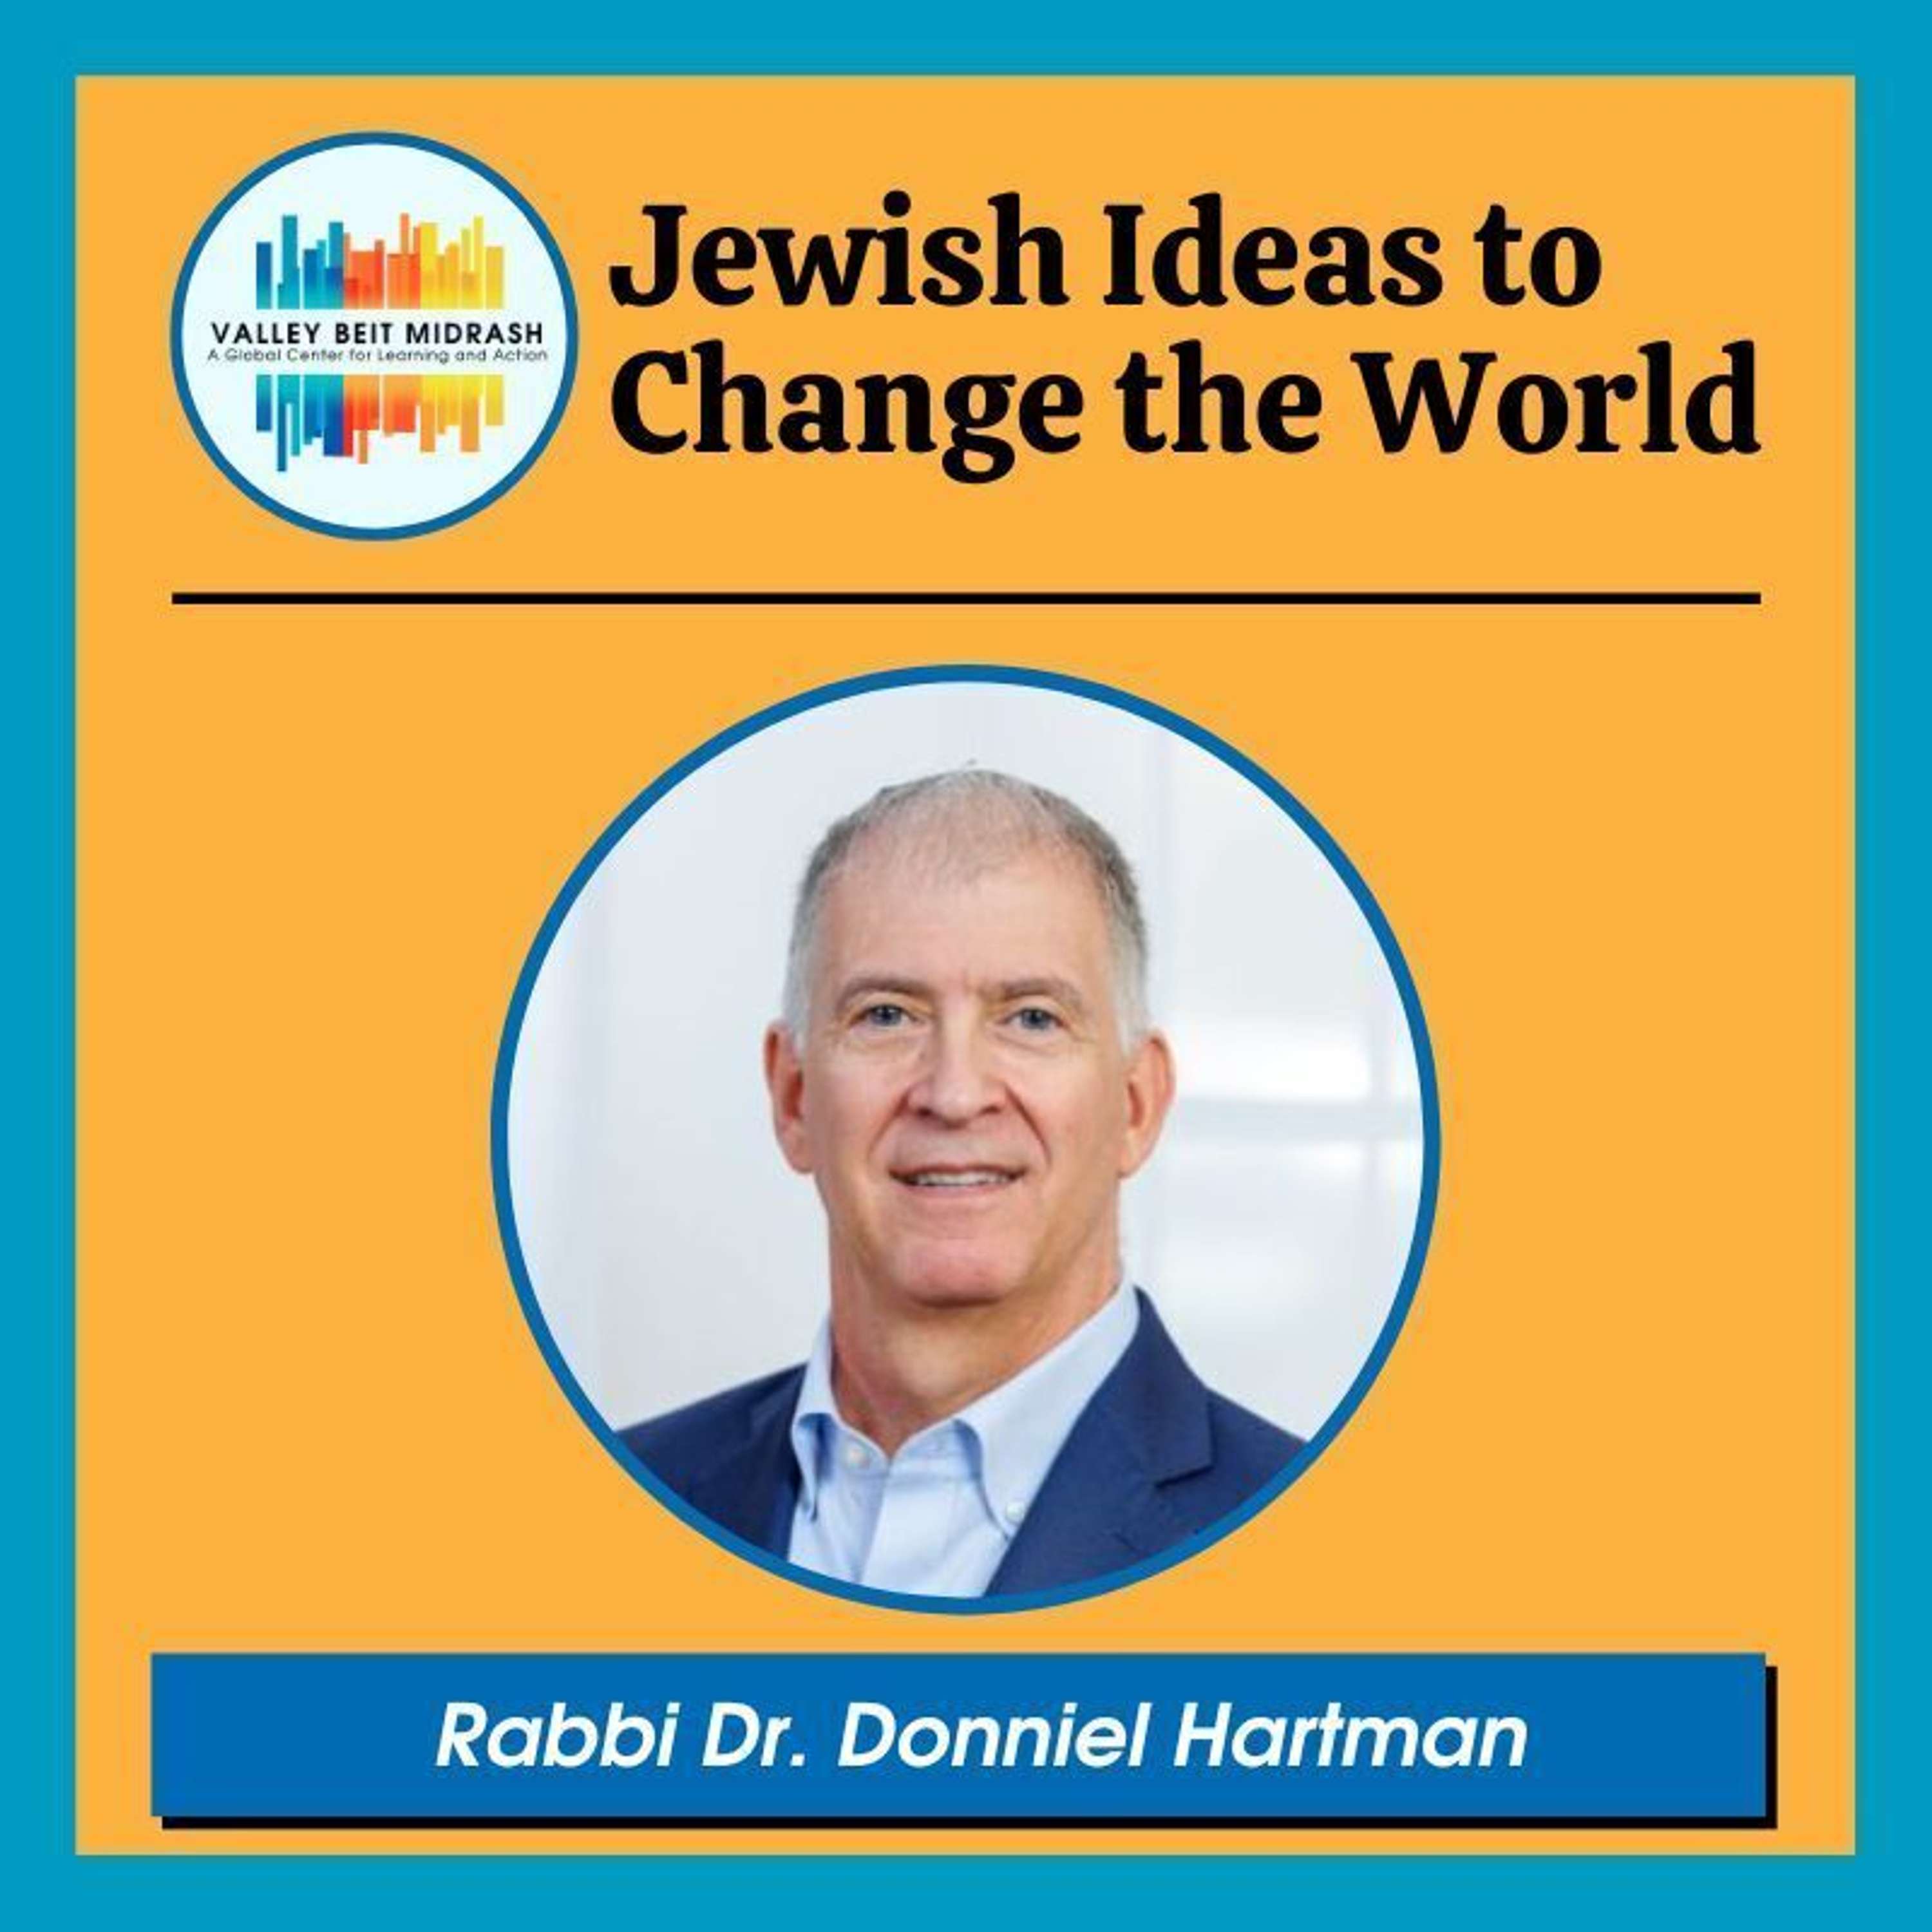 Pluralism, Democracy & Israeli Protests: An Interview with Rabbi Dr. Donniel Hartman